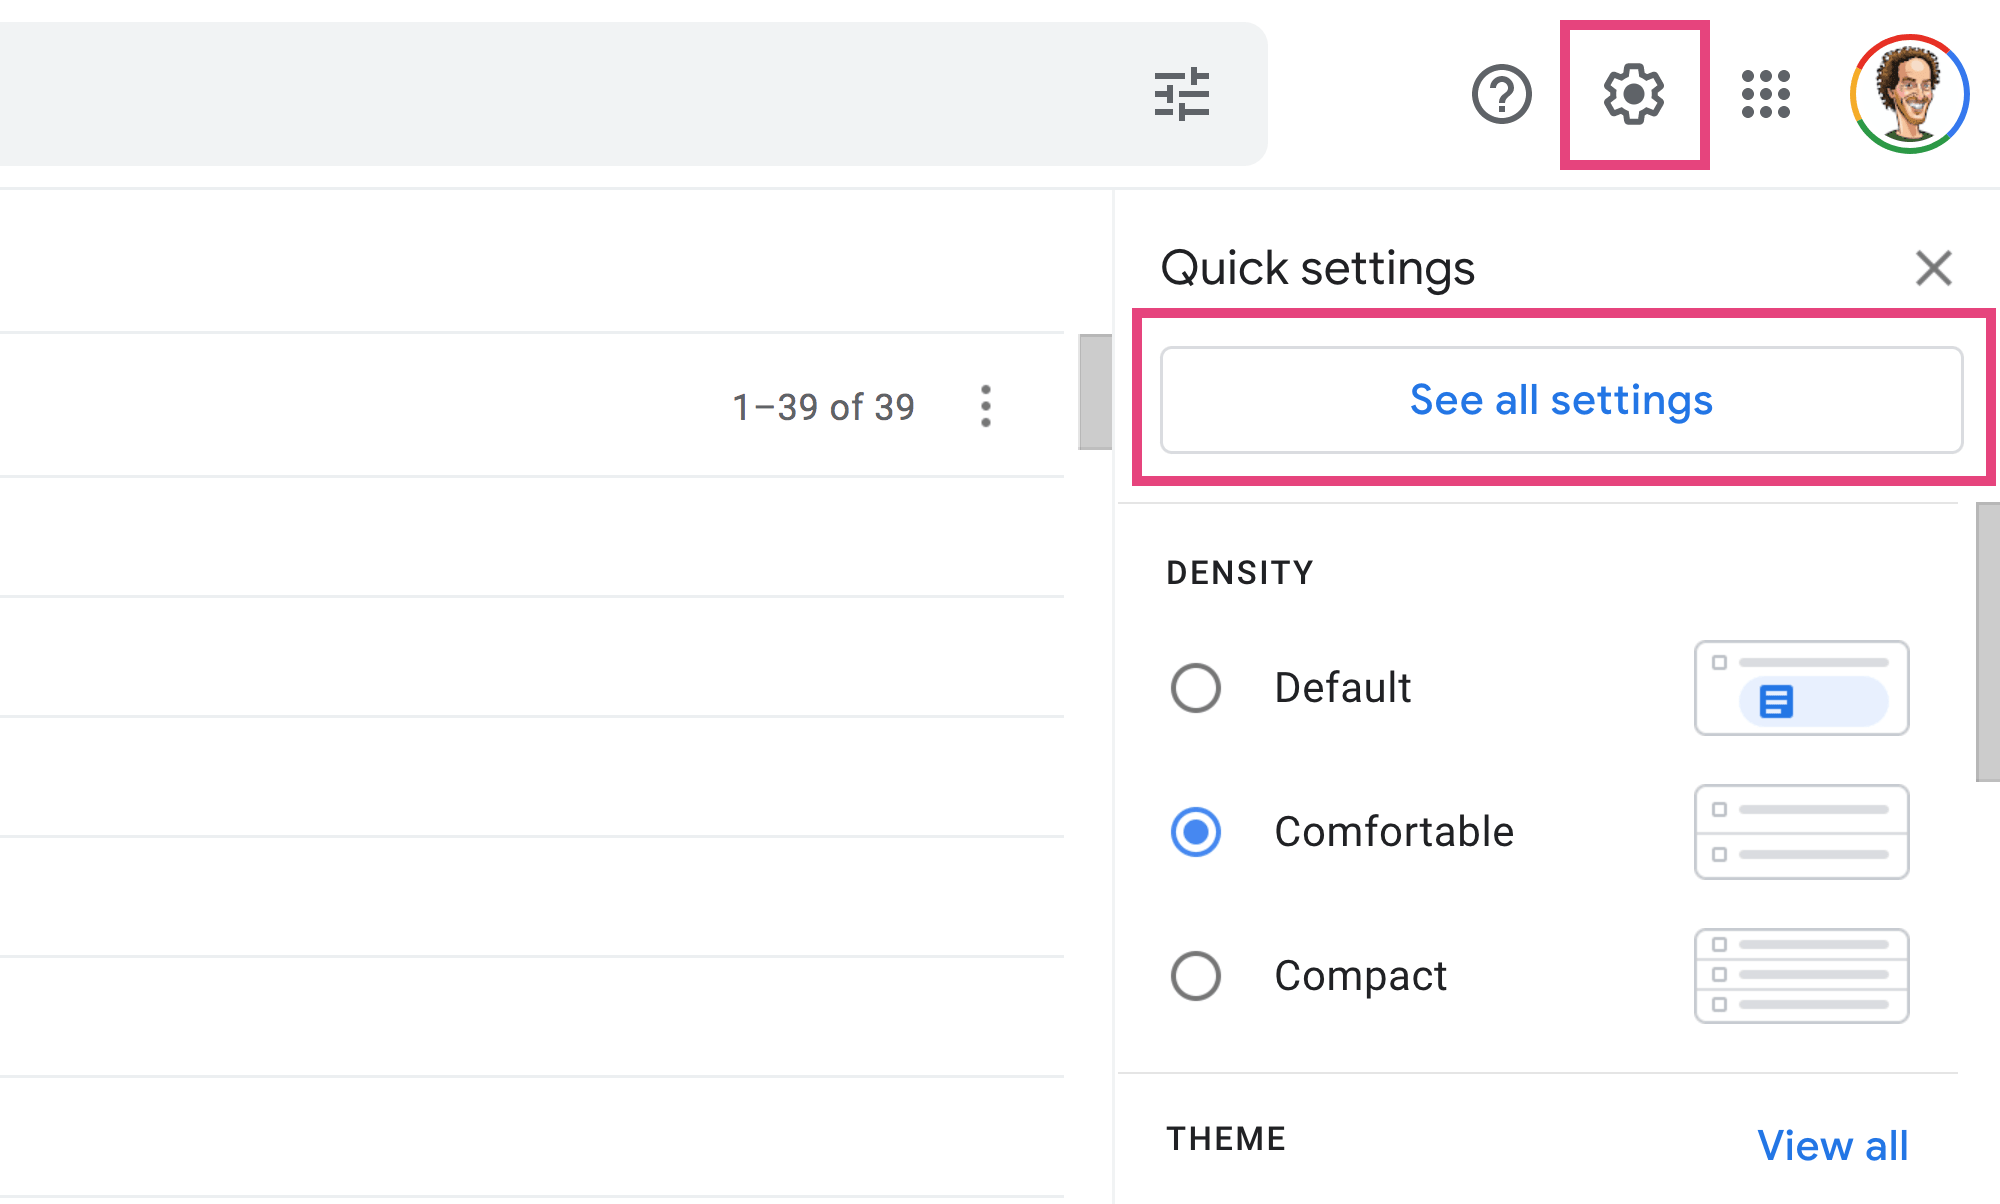 Step 1: Log in to your Google Gmail account.
Step 2: Click on the gear icon in the upper-right corner and select "Settings".